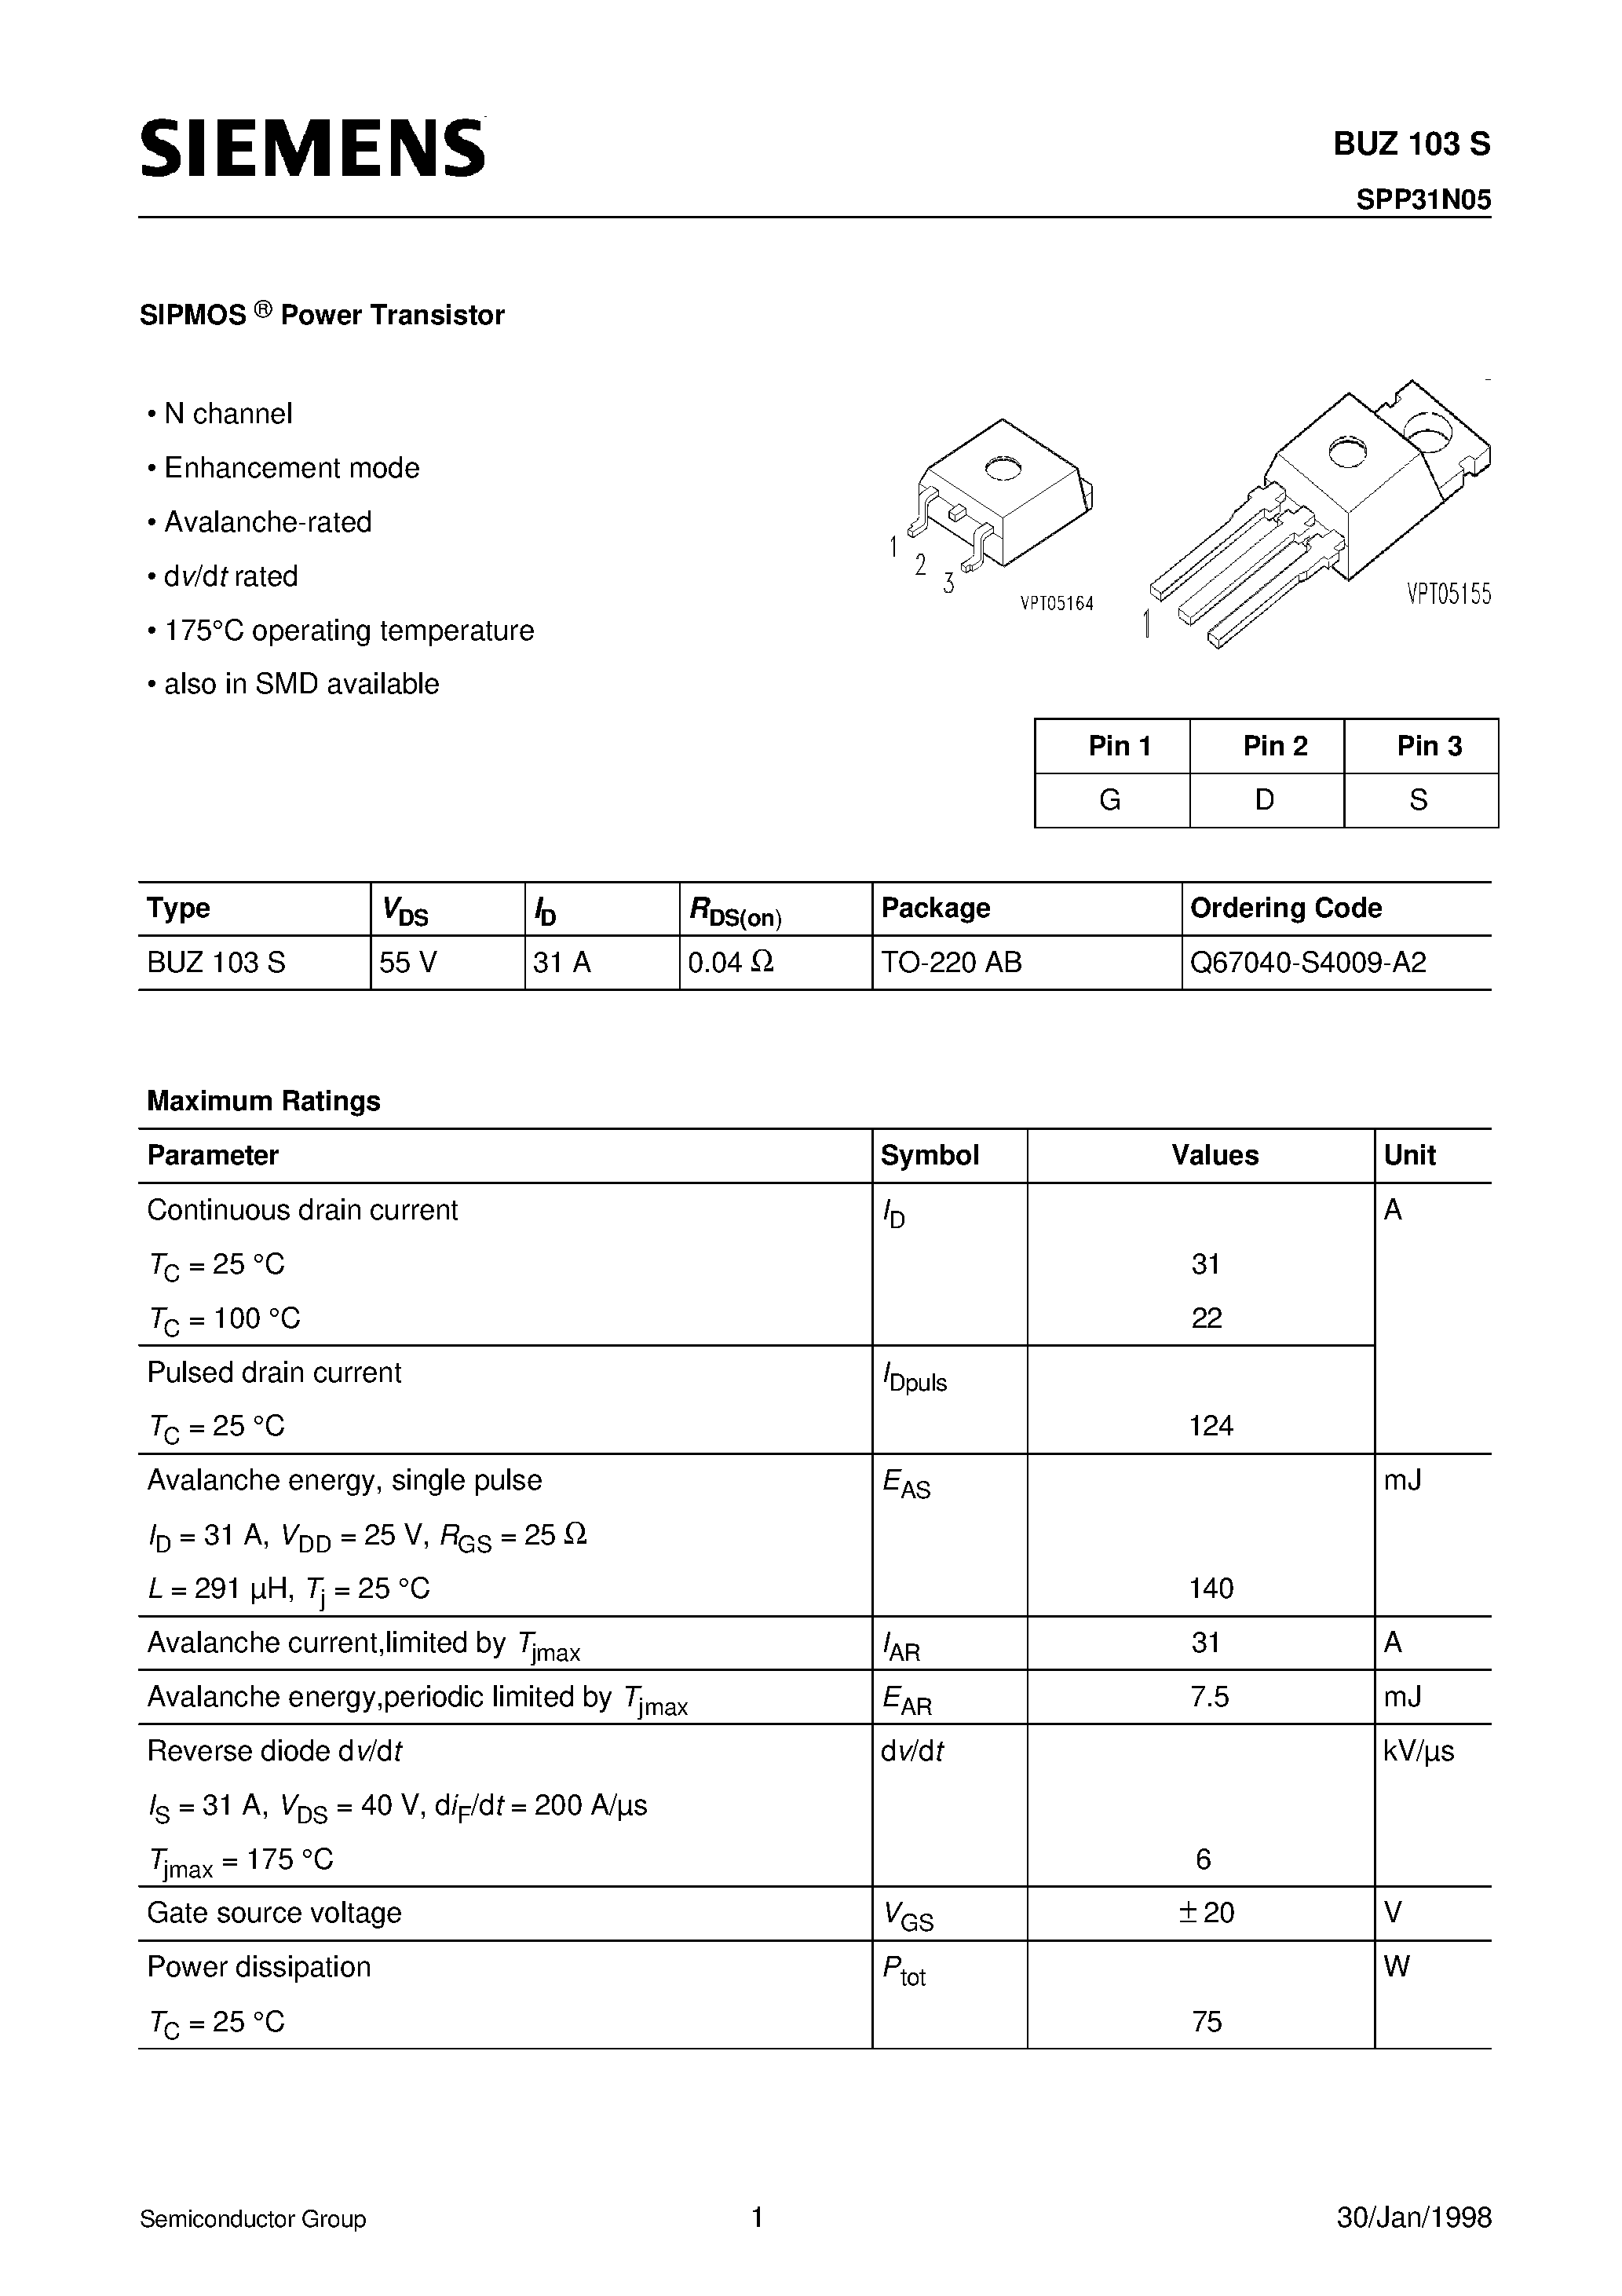 Datasheet BUZ103S - SIPMOS Power Transistor (N channel Enhancement mode Avalanche-rated dv/dt rated 175C operating temperature) page 1